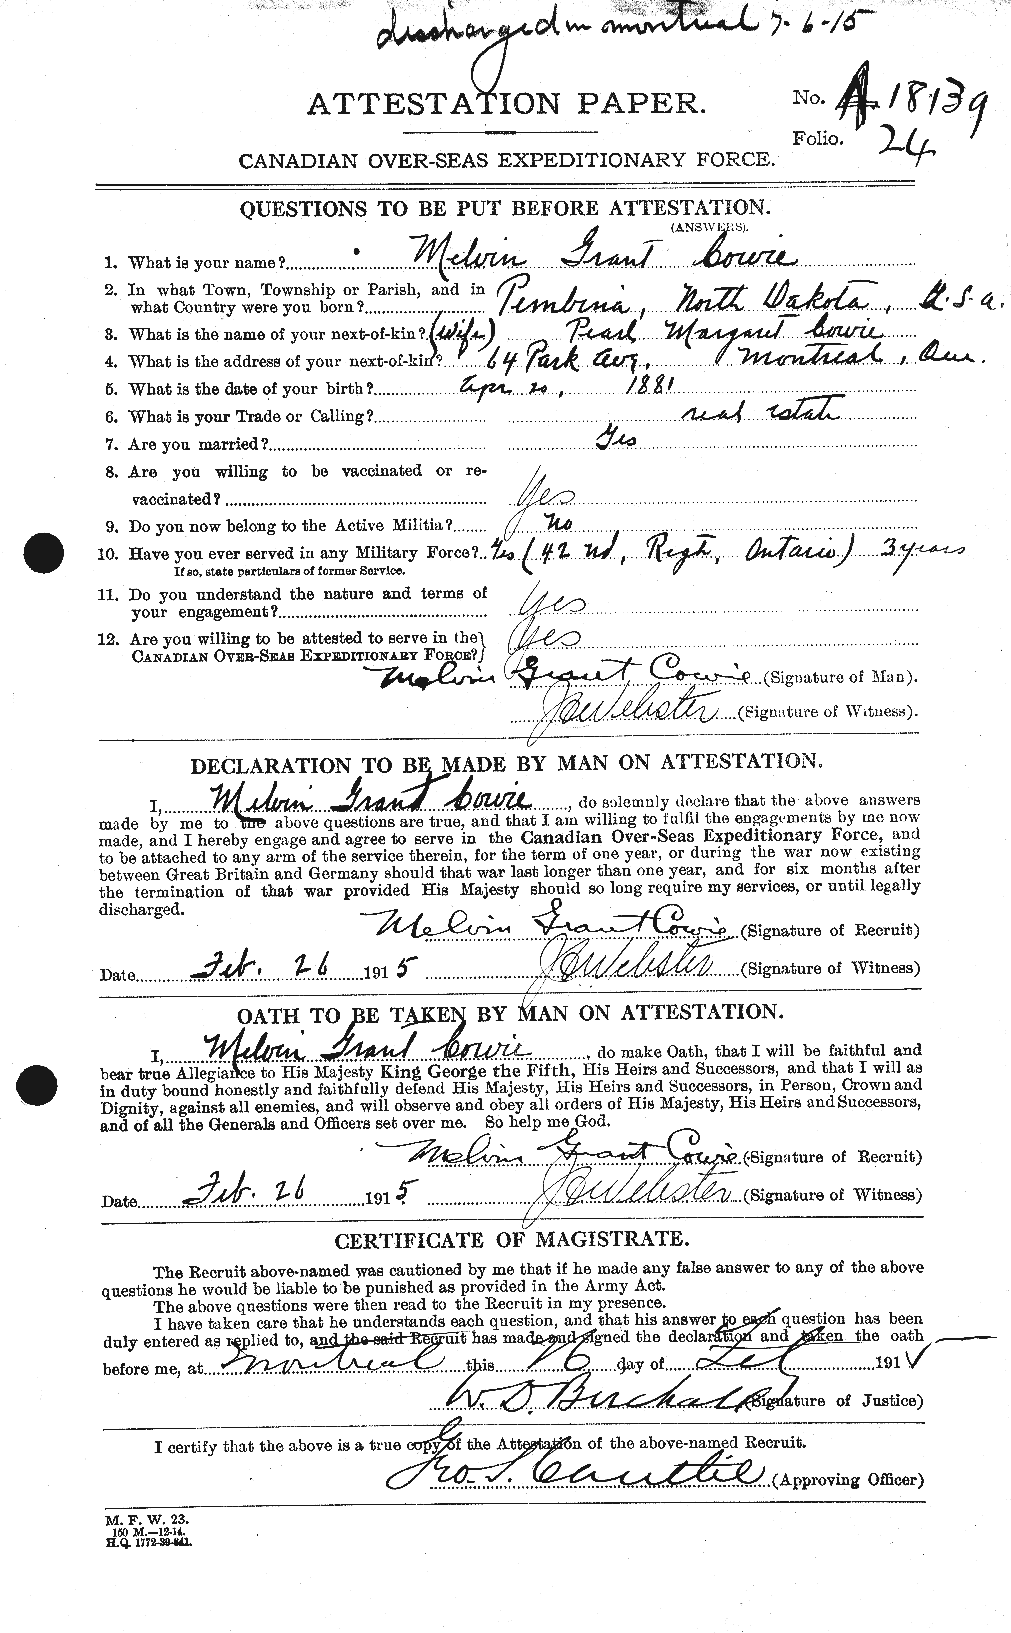 Personnel Records of the First World War - CEF 059883a